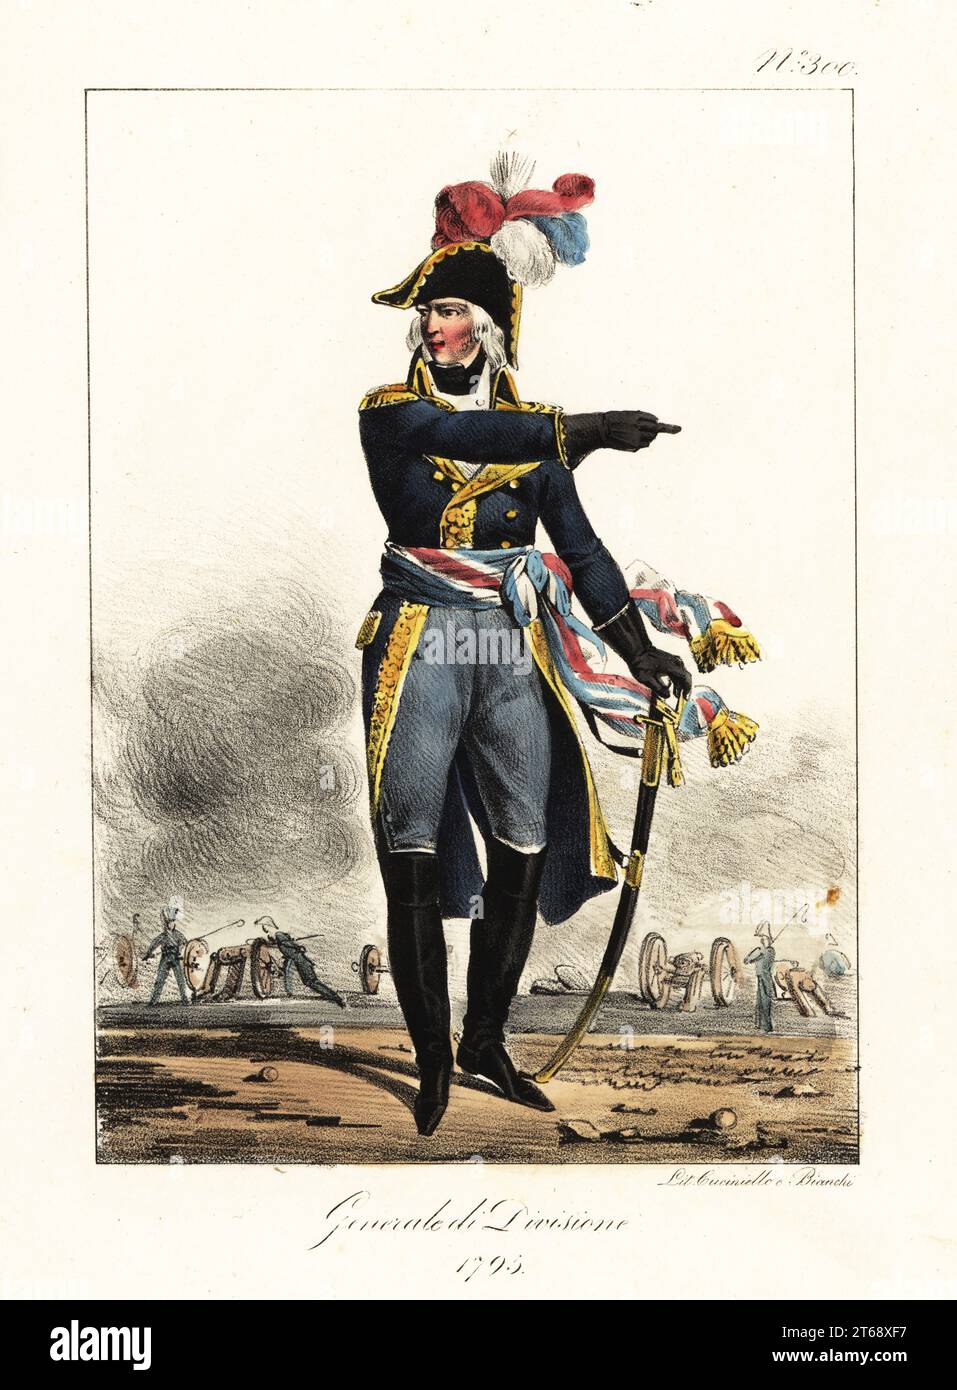 Uniform of a General in the French Revolutionary Army, 1795. He wears a bicorne with tricolor plumes, blue coat with gold epaulettes, cravat, tricolor sash belt, blue trousers, and boots. He issues orders to artillery gunners. General de Division. Handcoloured lithograph by Lorenzo Bianchi and Domenico Cuciniello after Hippolyte Lecomte from Costumi civili e militari della monarchia francese dal 1200 al 1820, Naples, 1825. Italian edition of Lecomtes Civilian and military costumes of the French monarchy from 1200 to 1820. Stock Photo